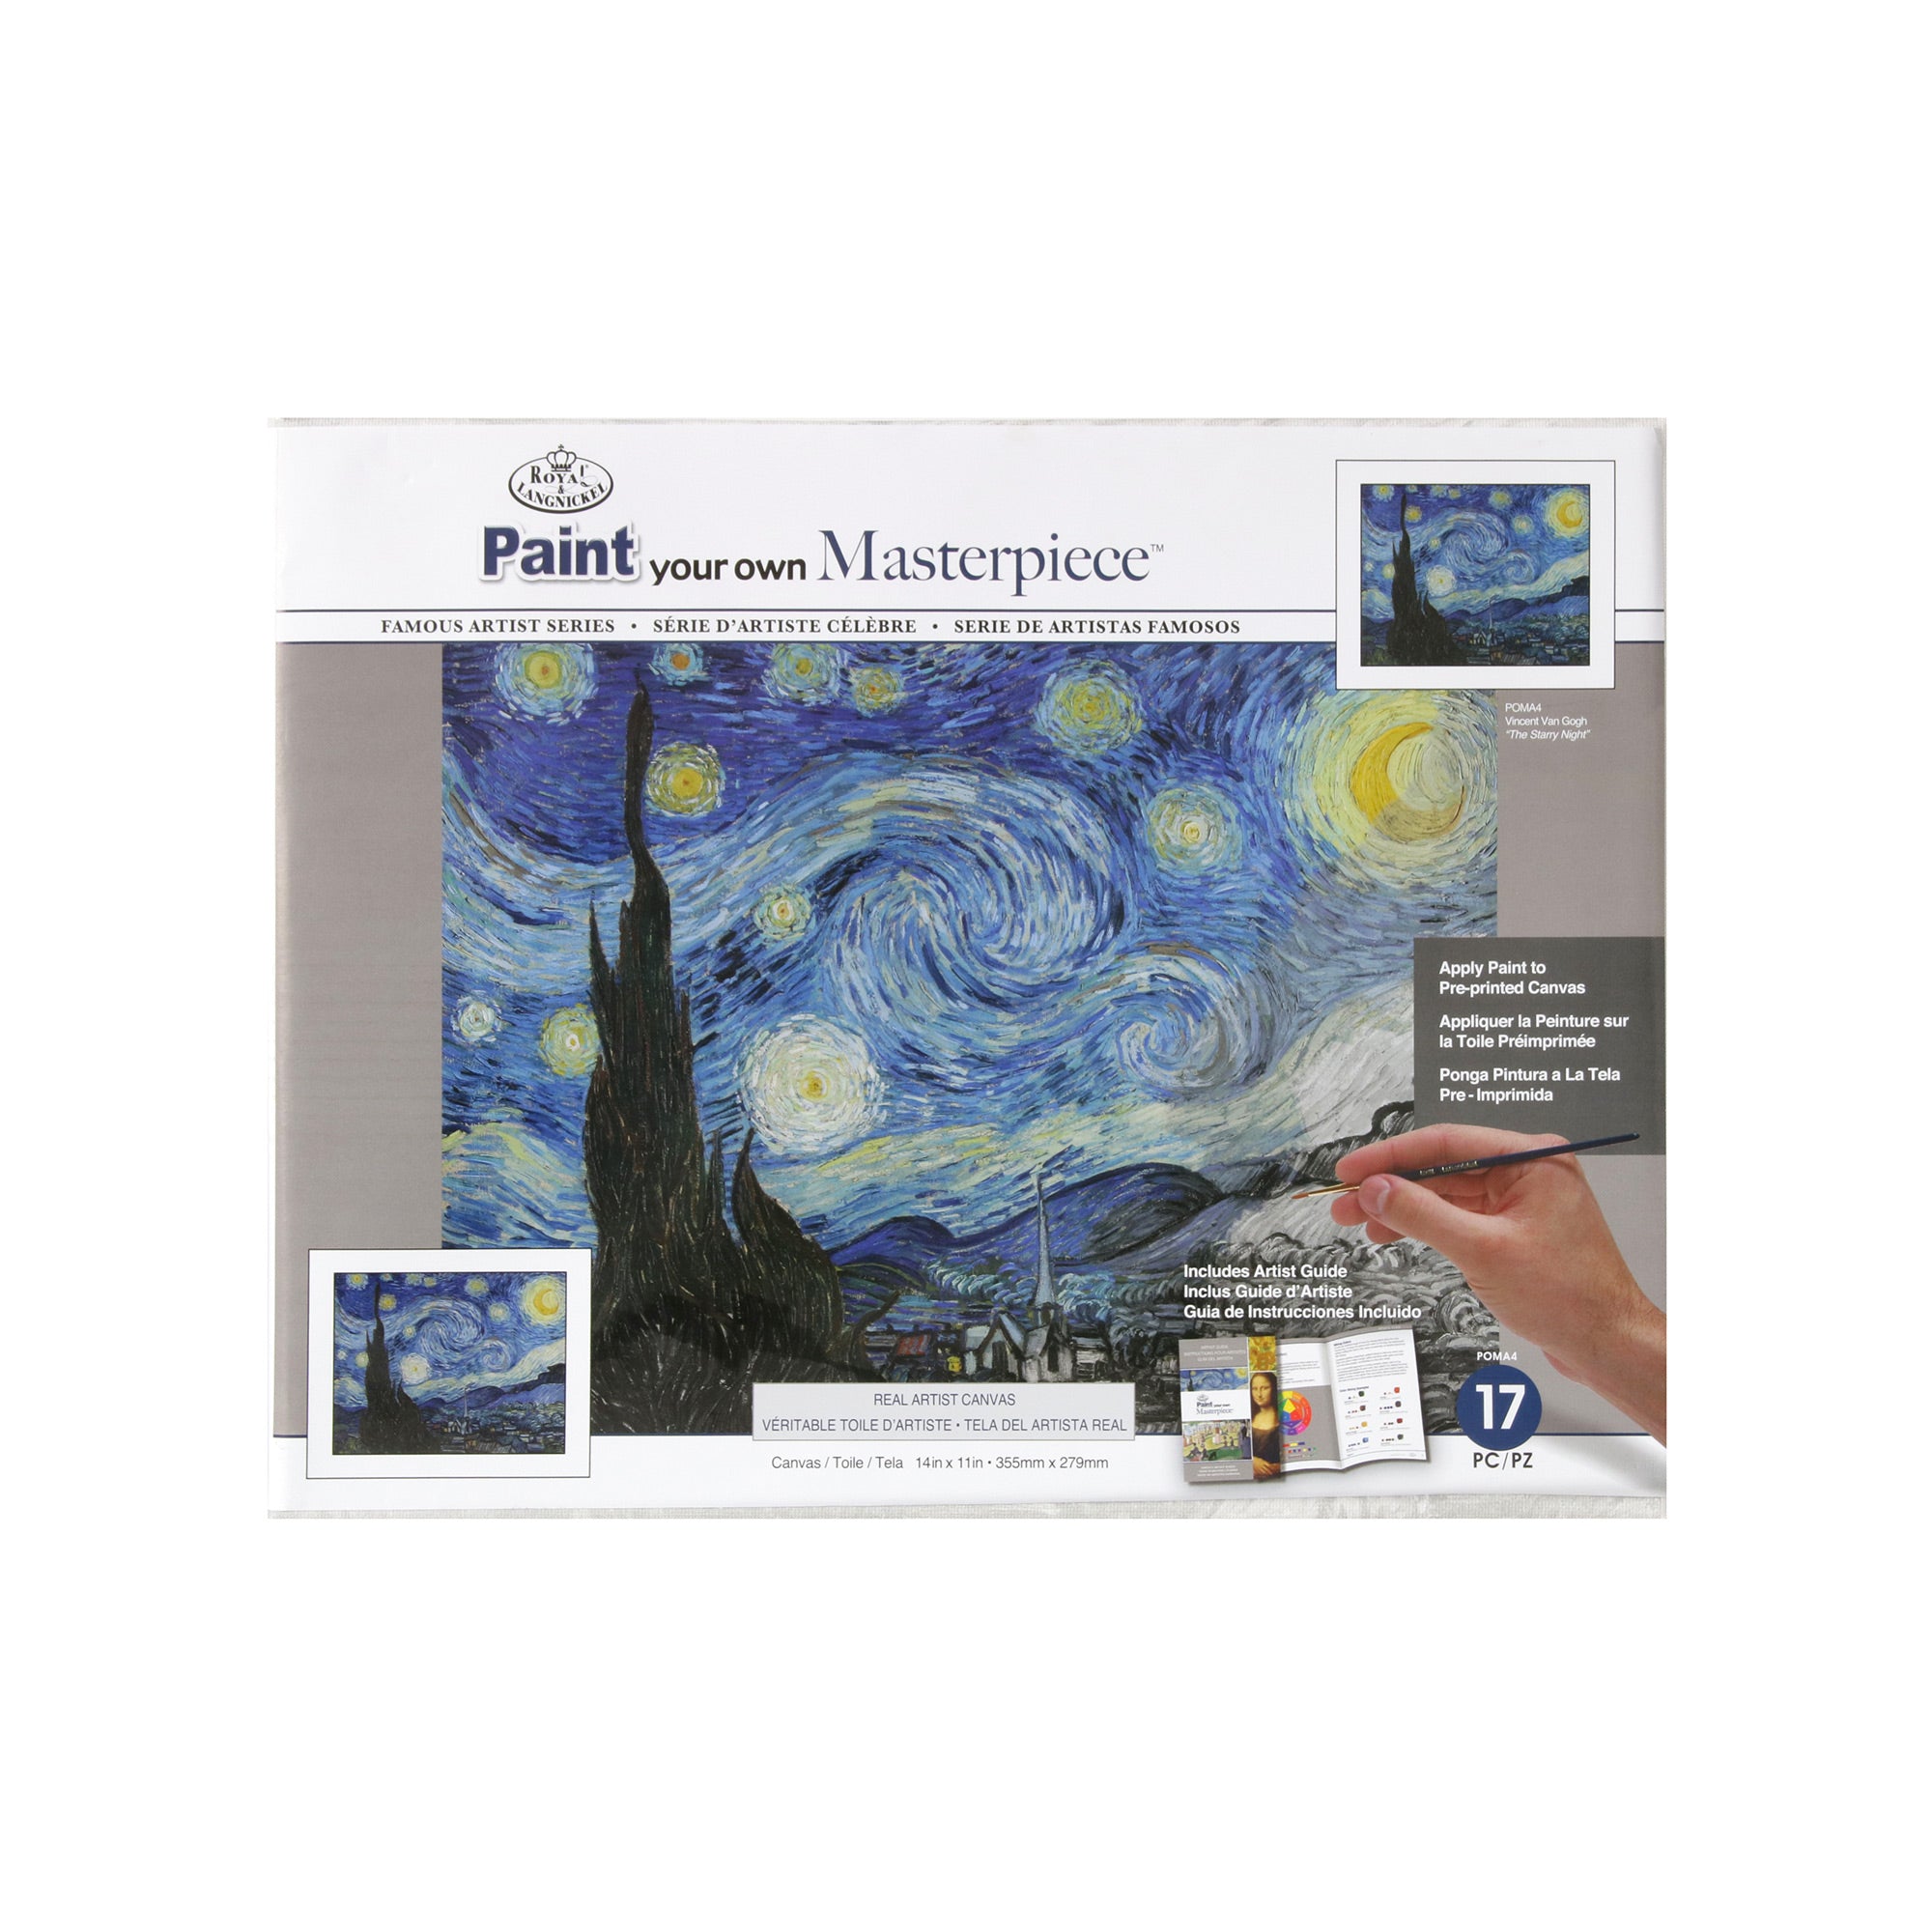 Bouck Paint by Number Kit for Adults - Van Gogh's Irises, Includes 14 inch, Brown